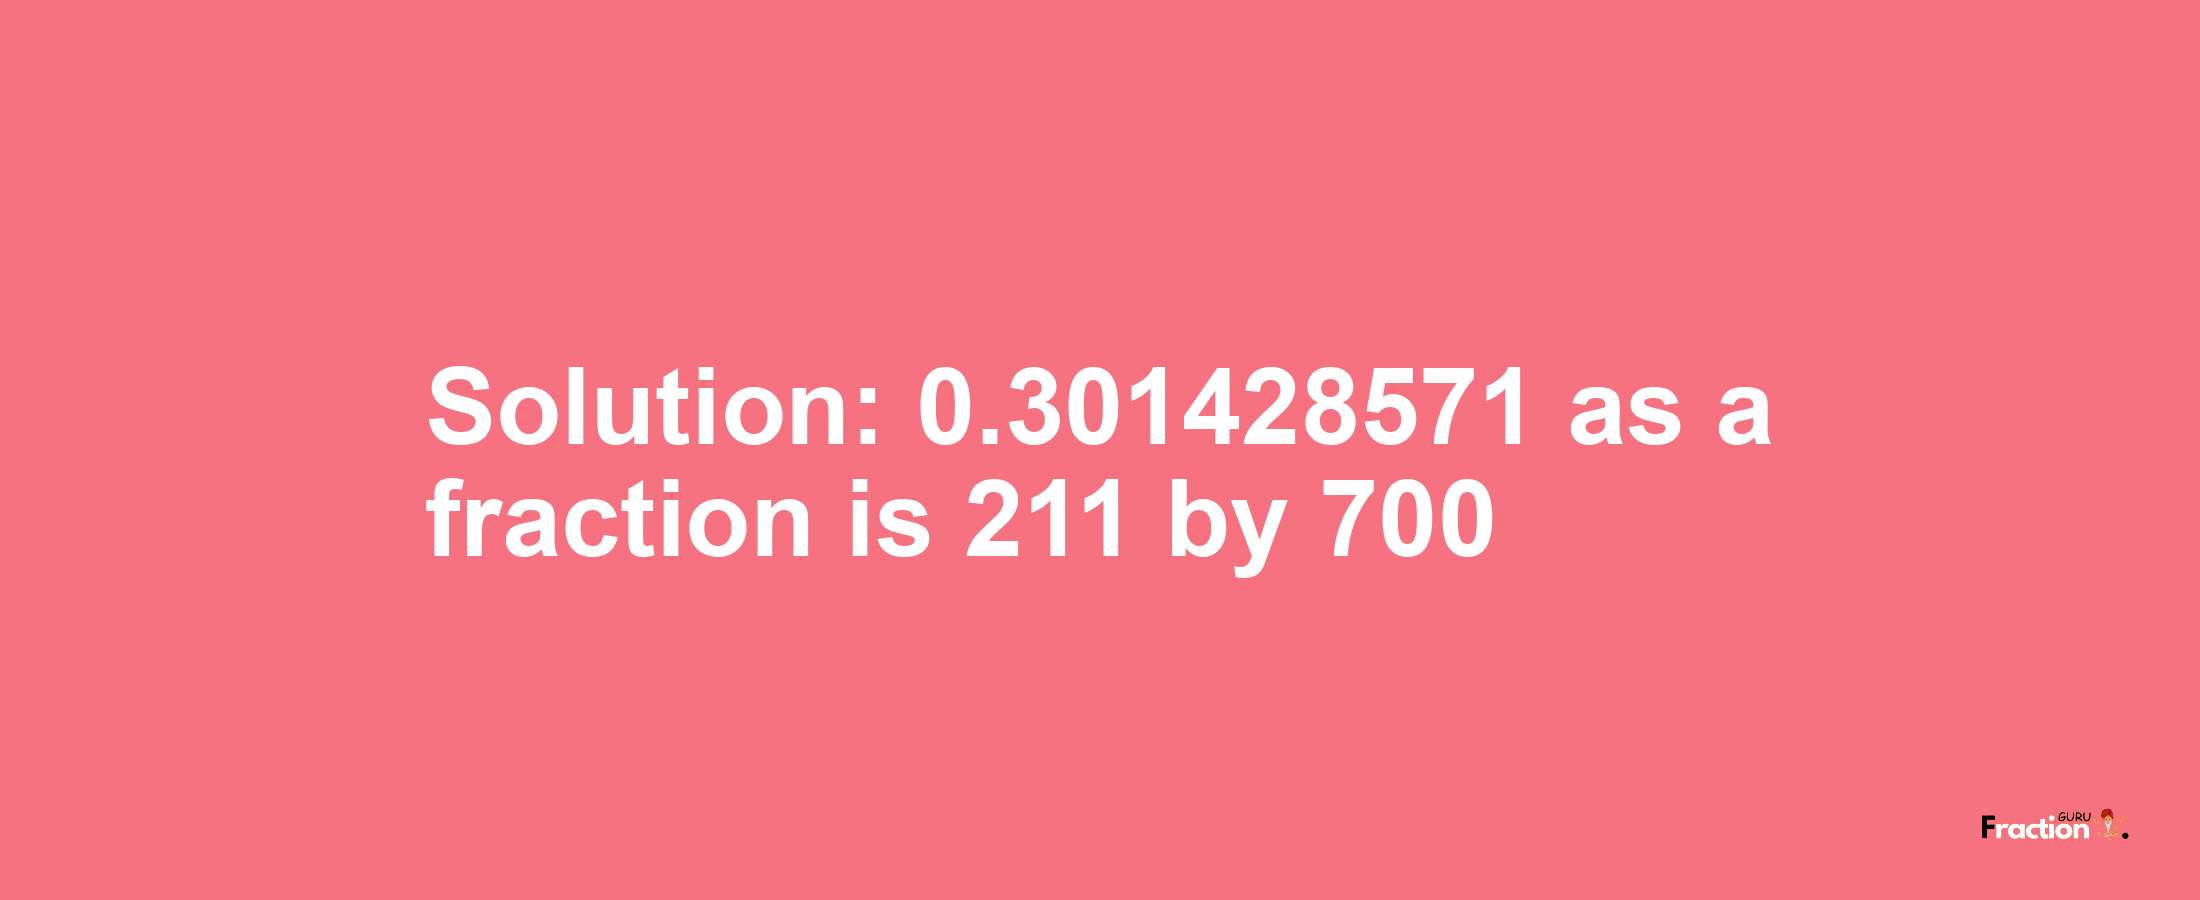 Solution:0.301428571 as a fraction is 211/700